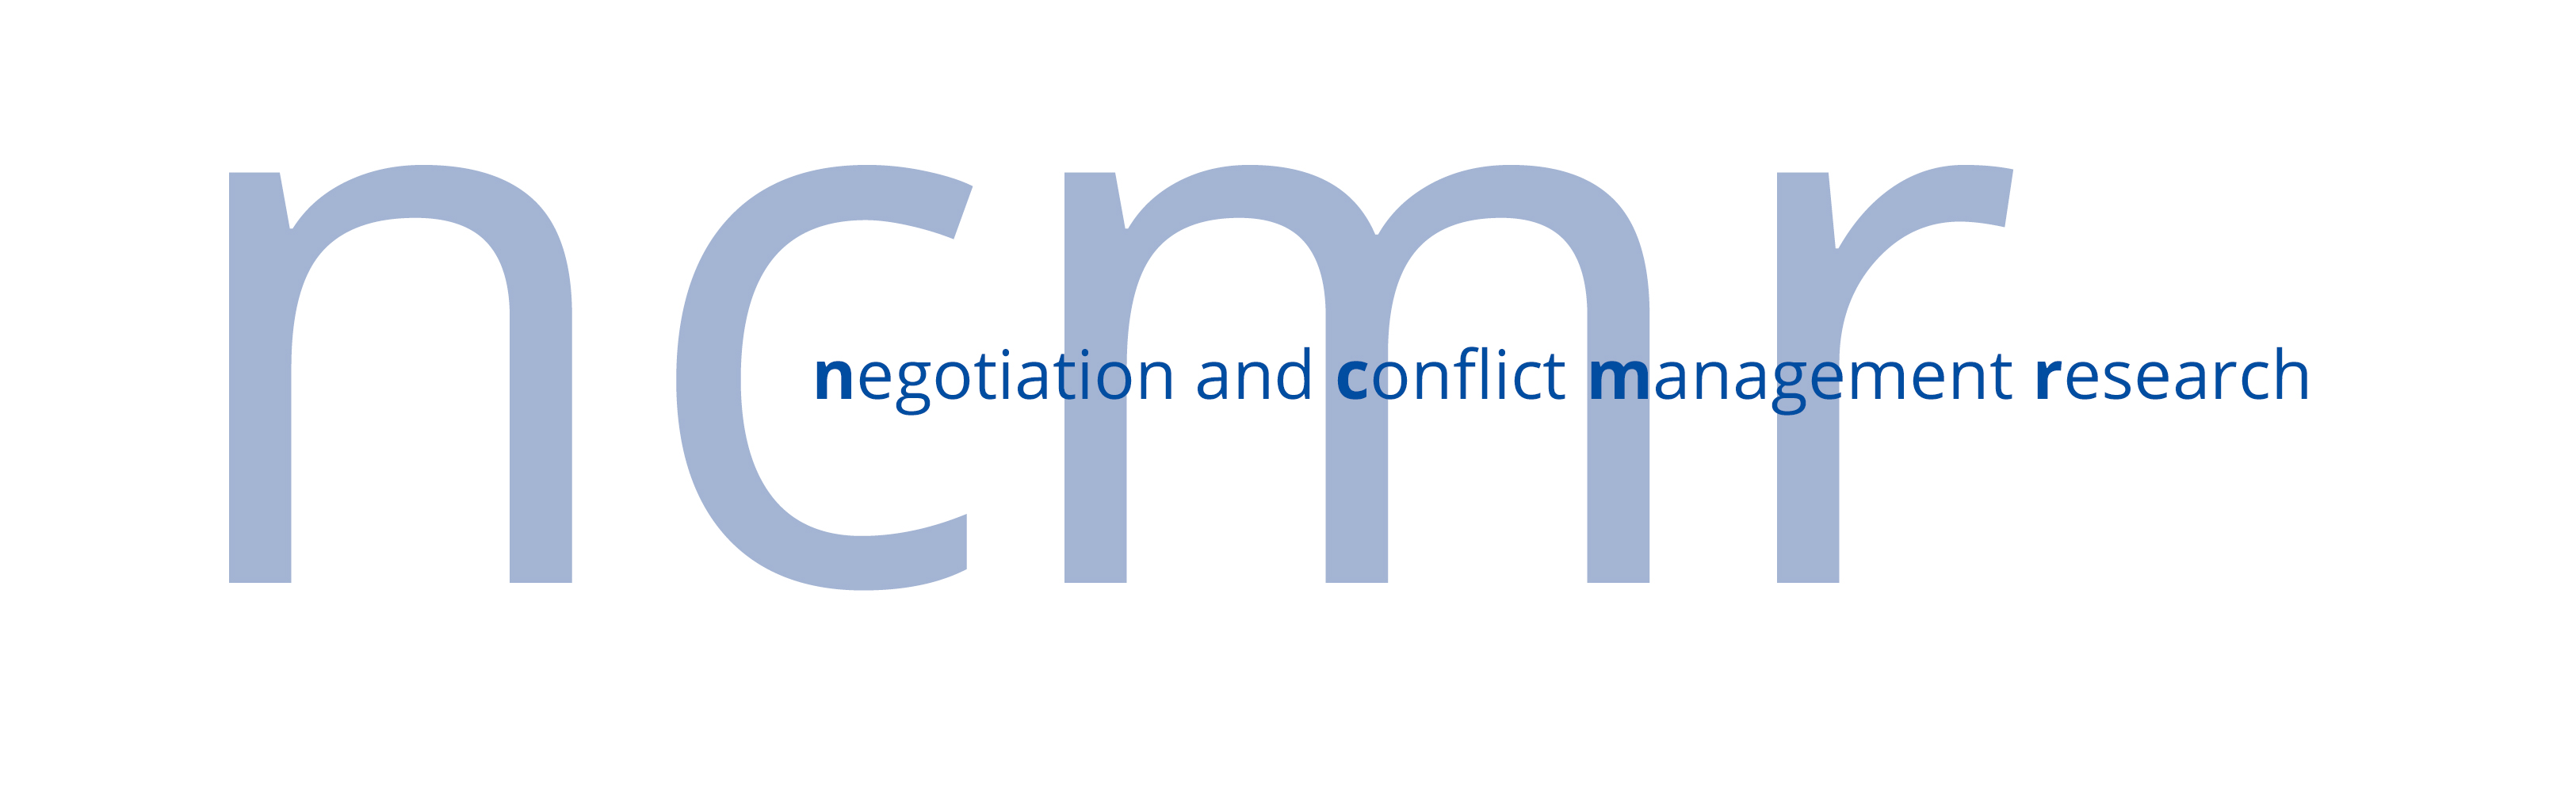 research paper on conflict management